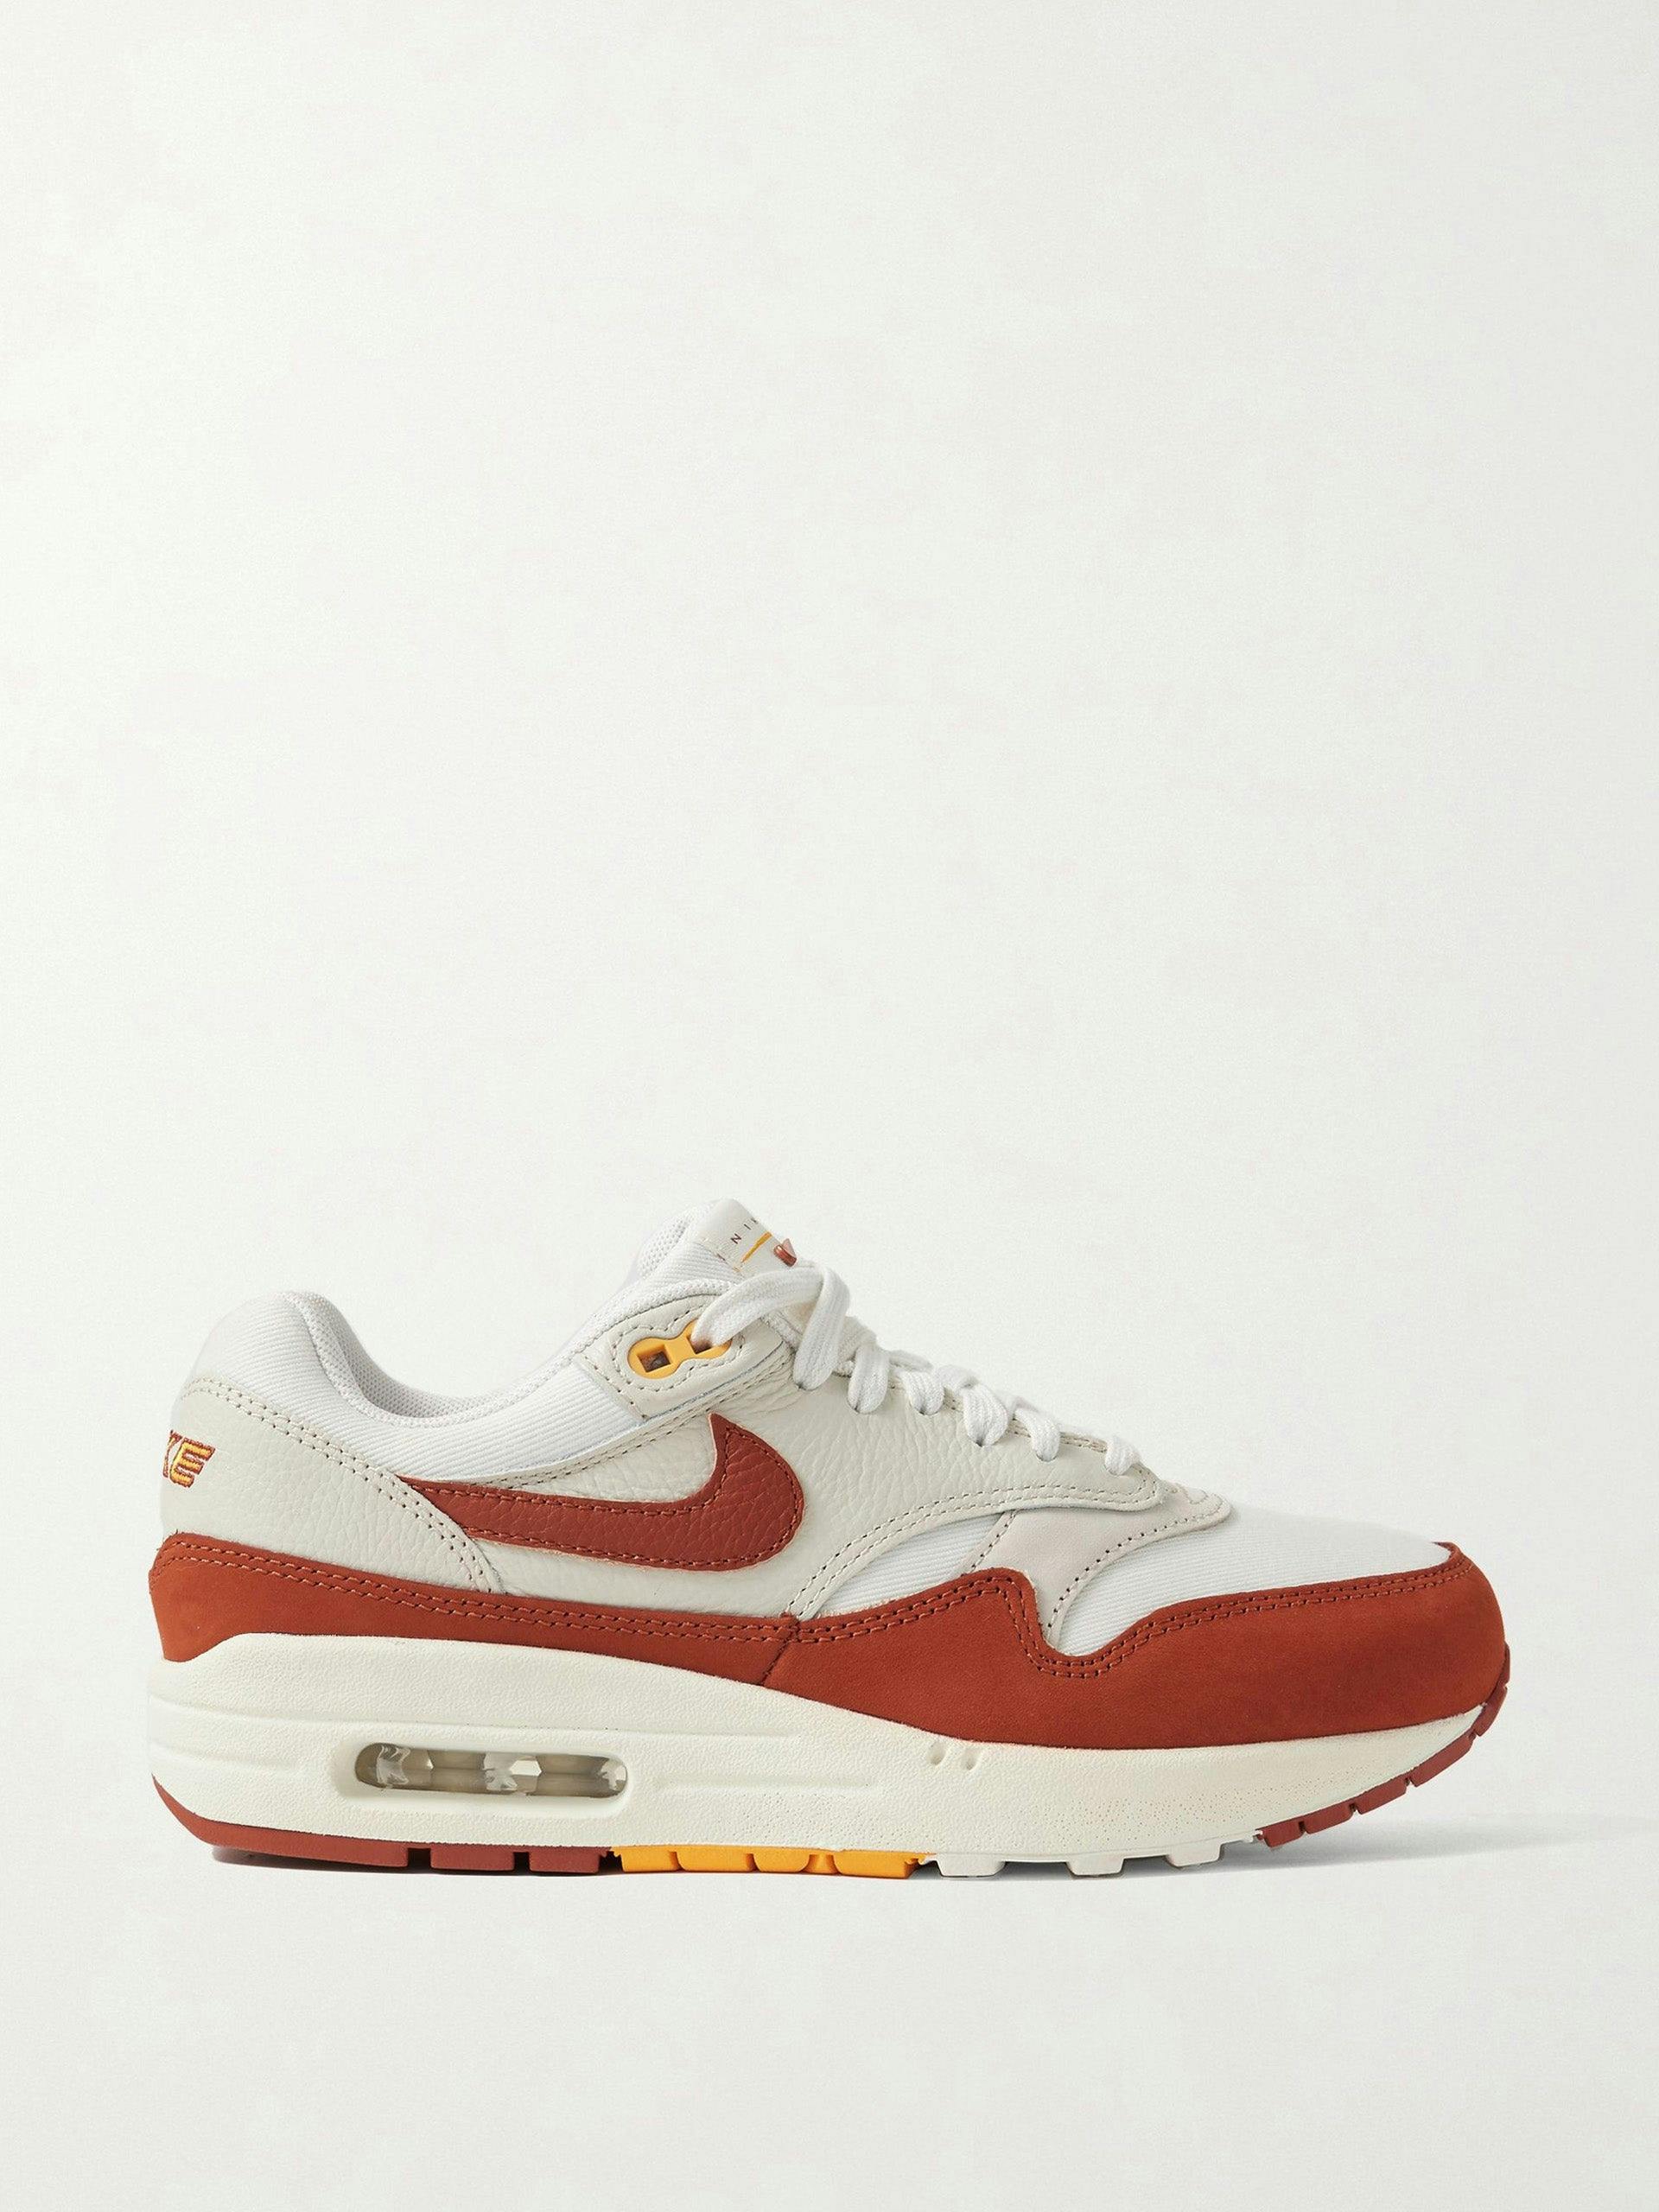 Air Max 1 textured-leather, suede and canvas sneakers